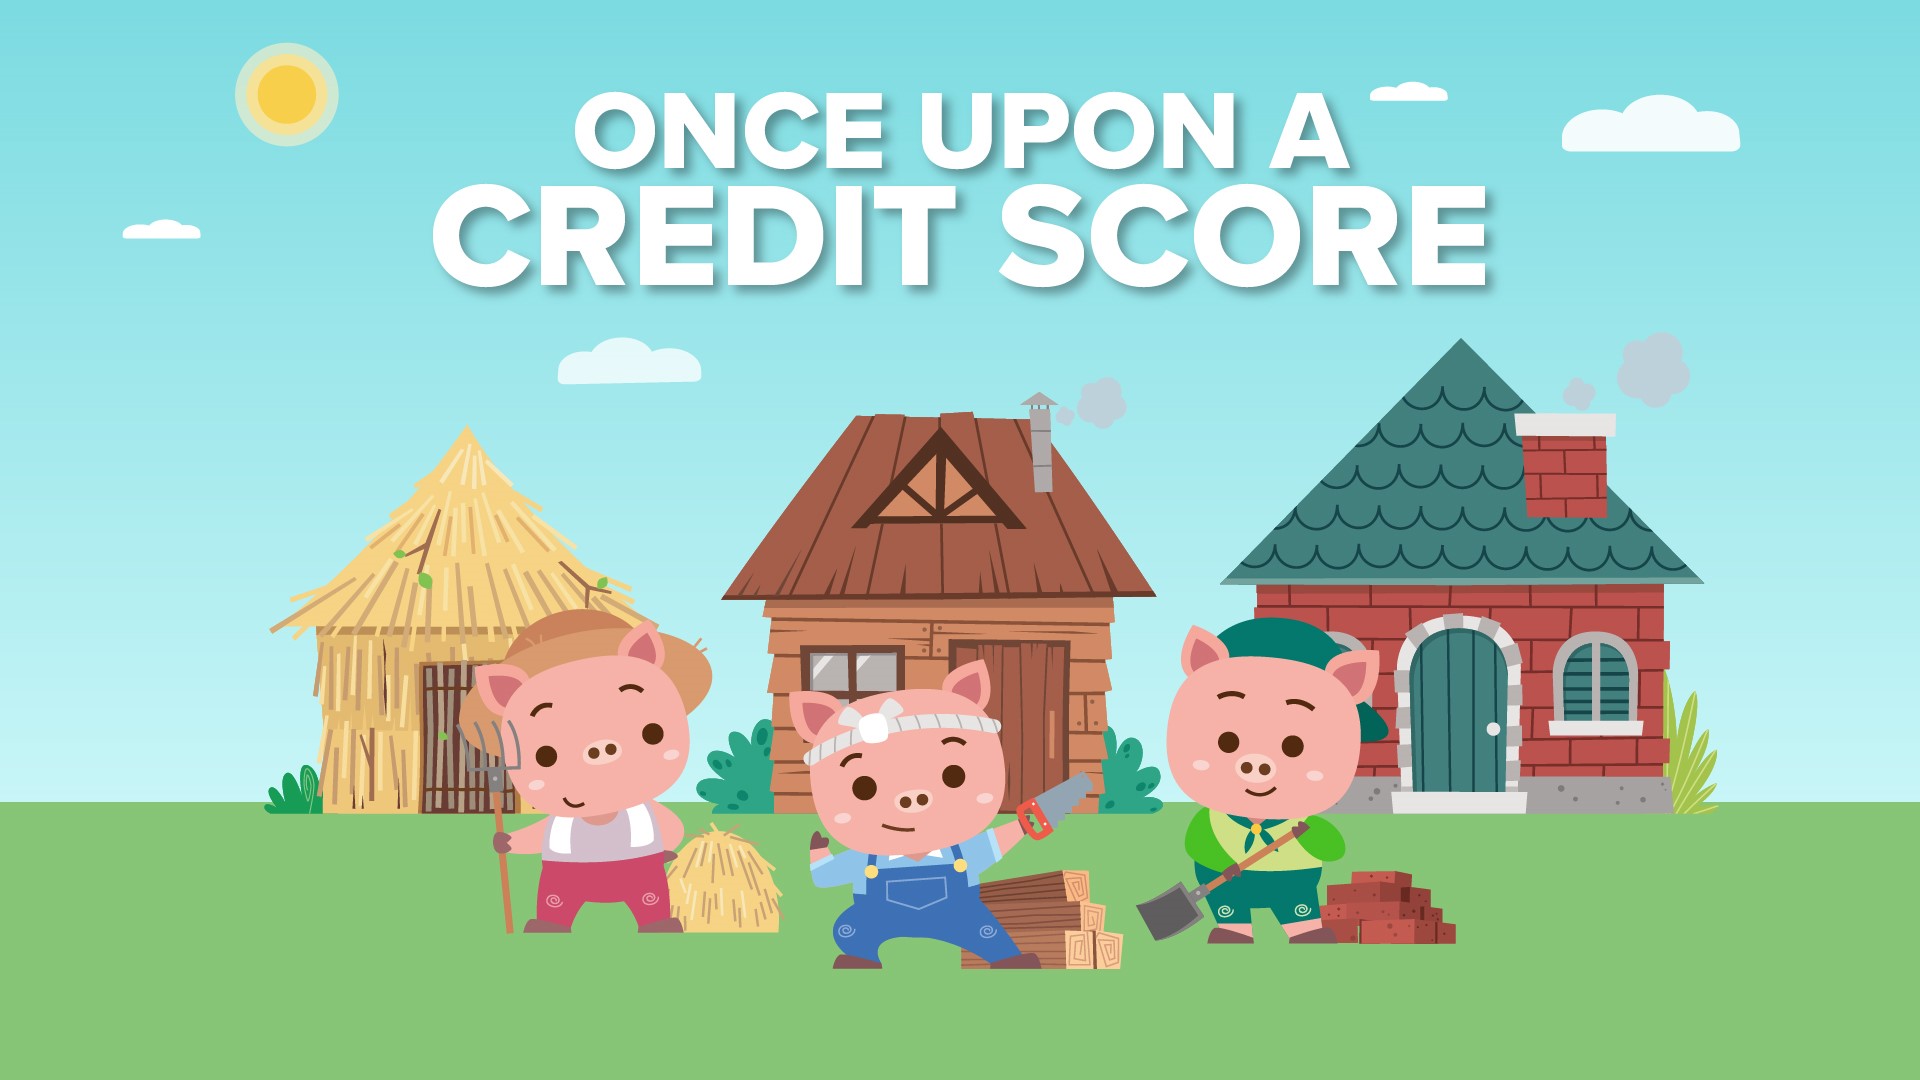 Once upon a credit score